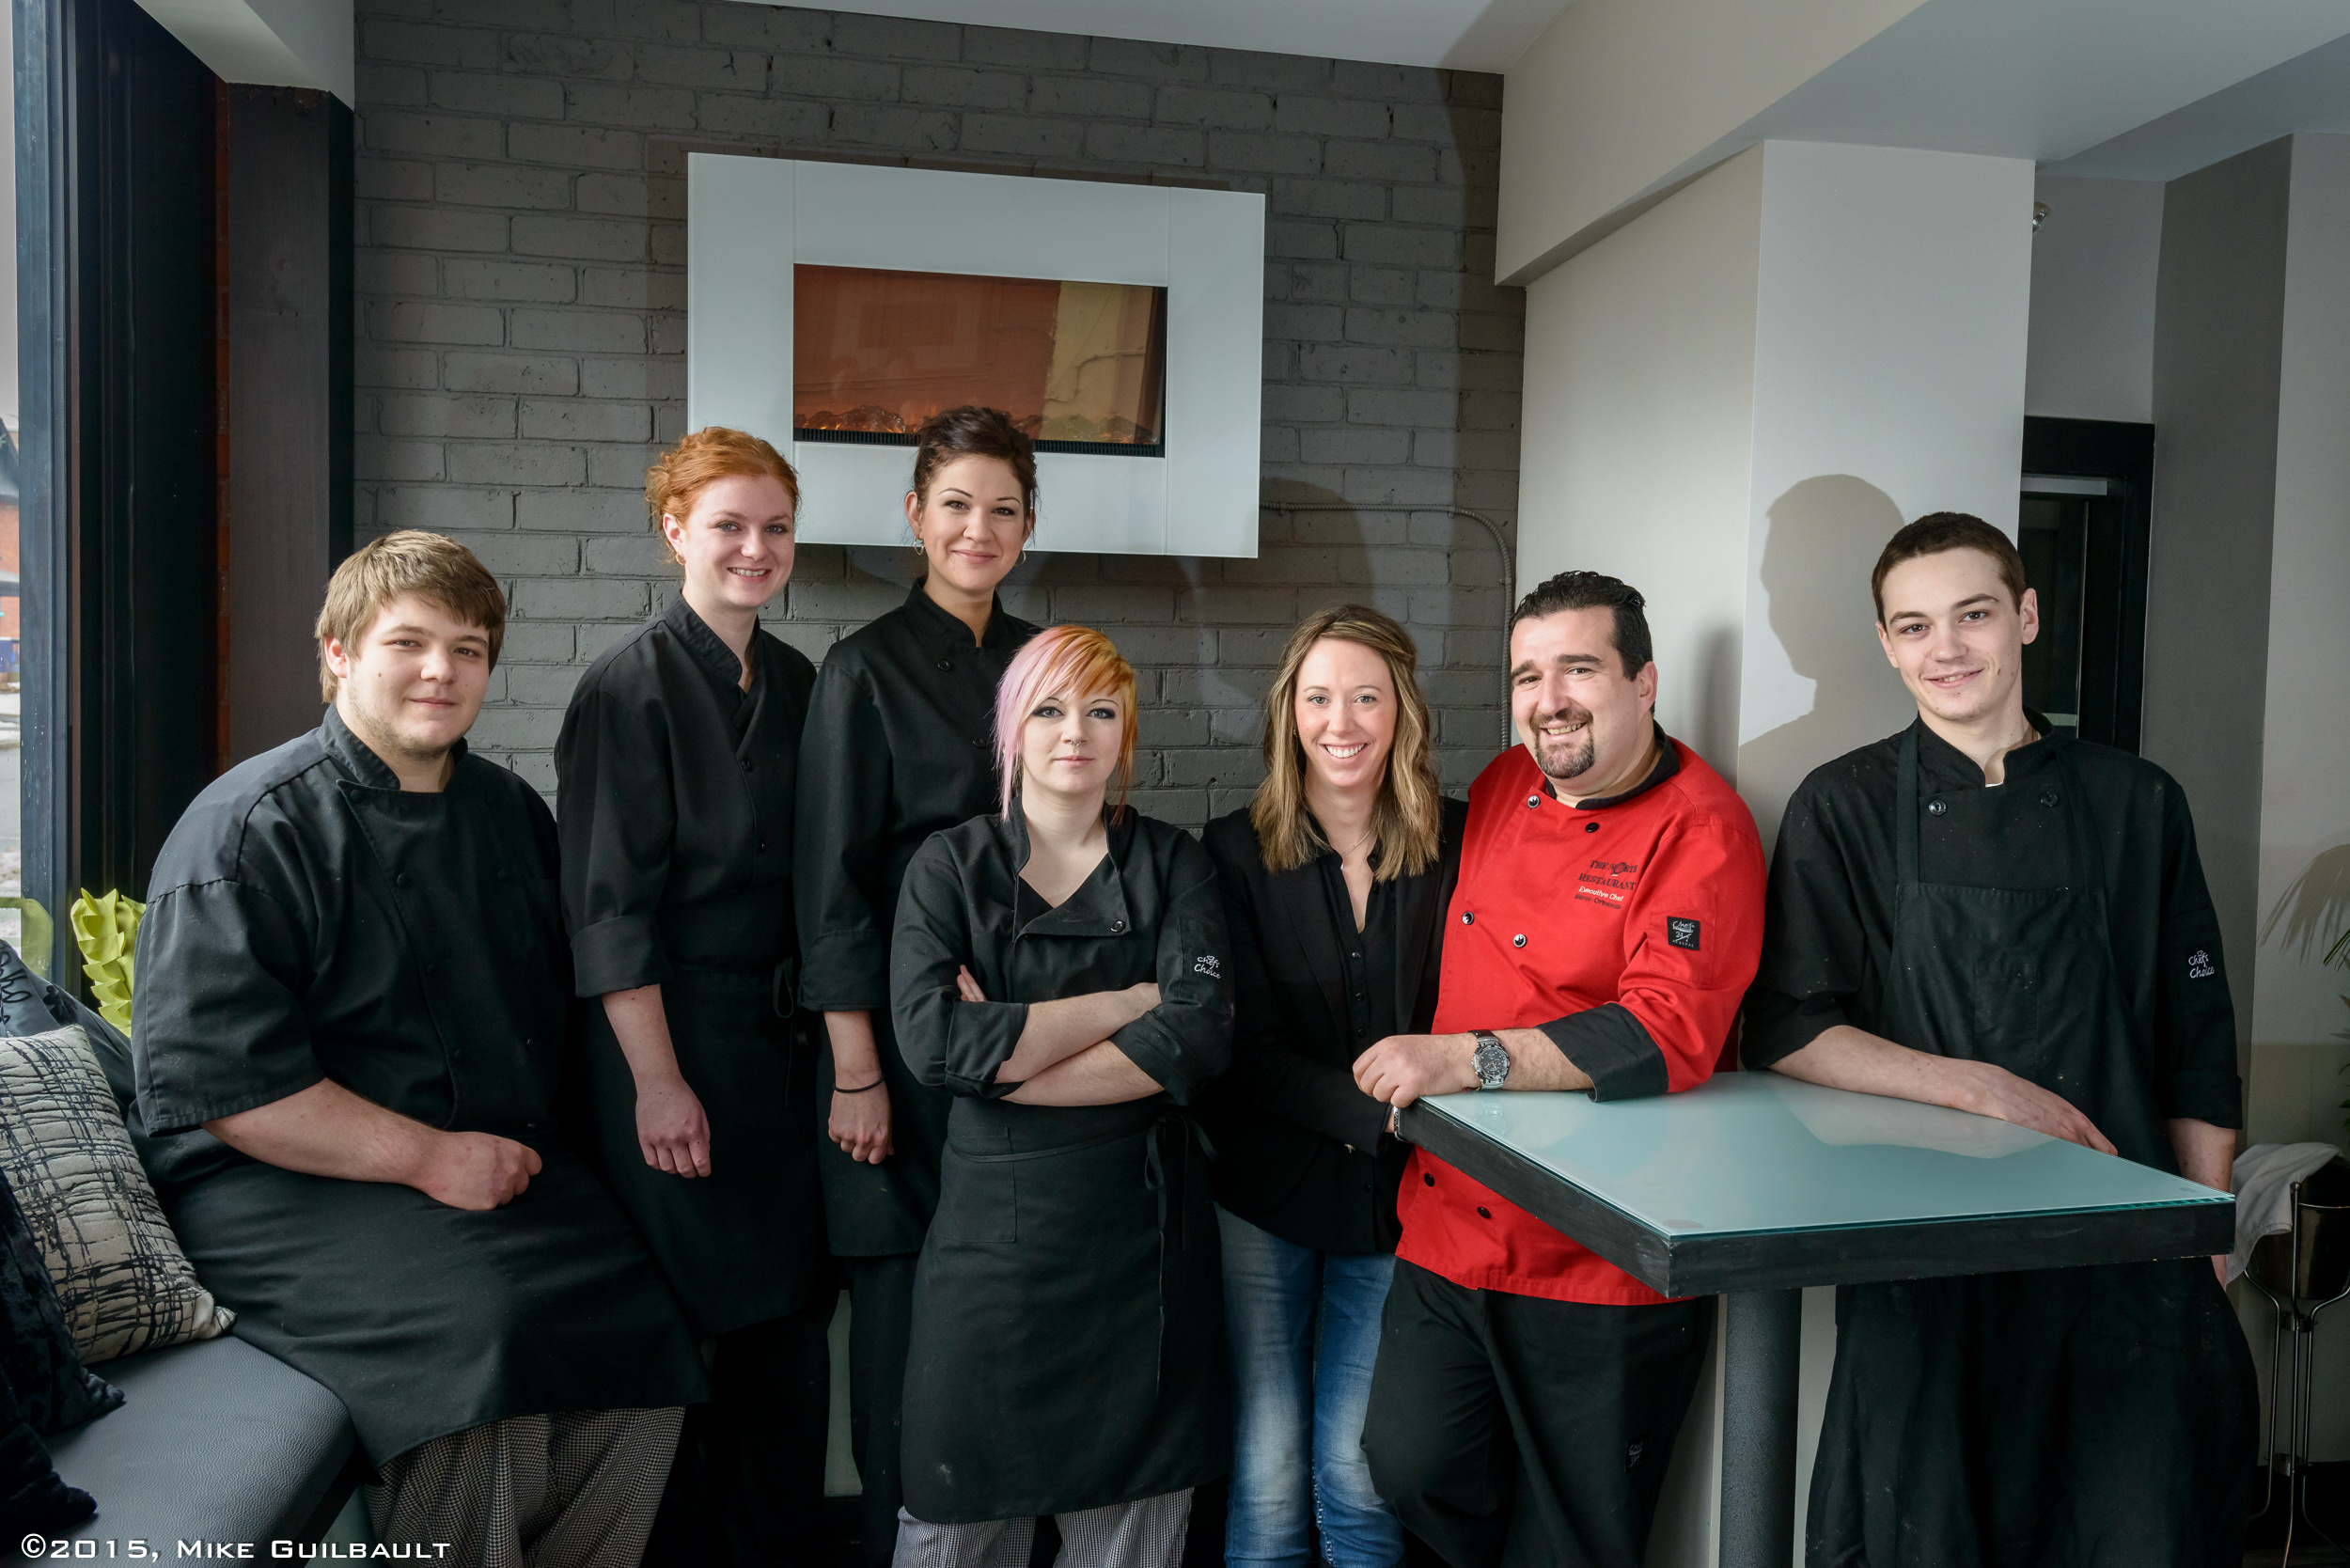 Portrait of Chef and staff